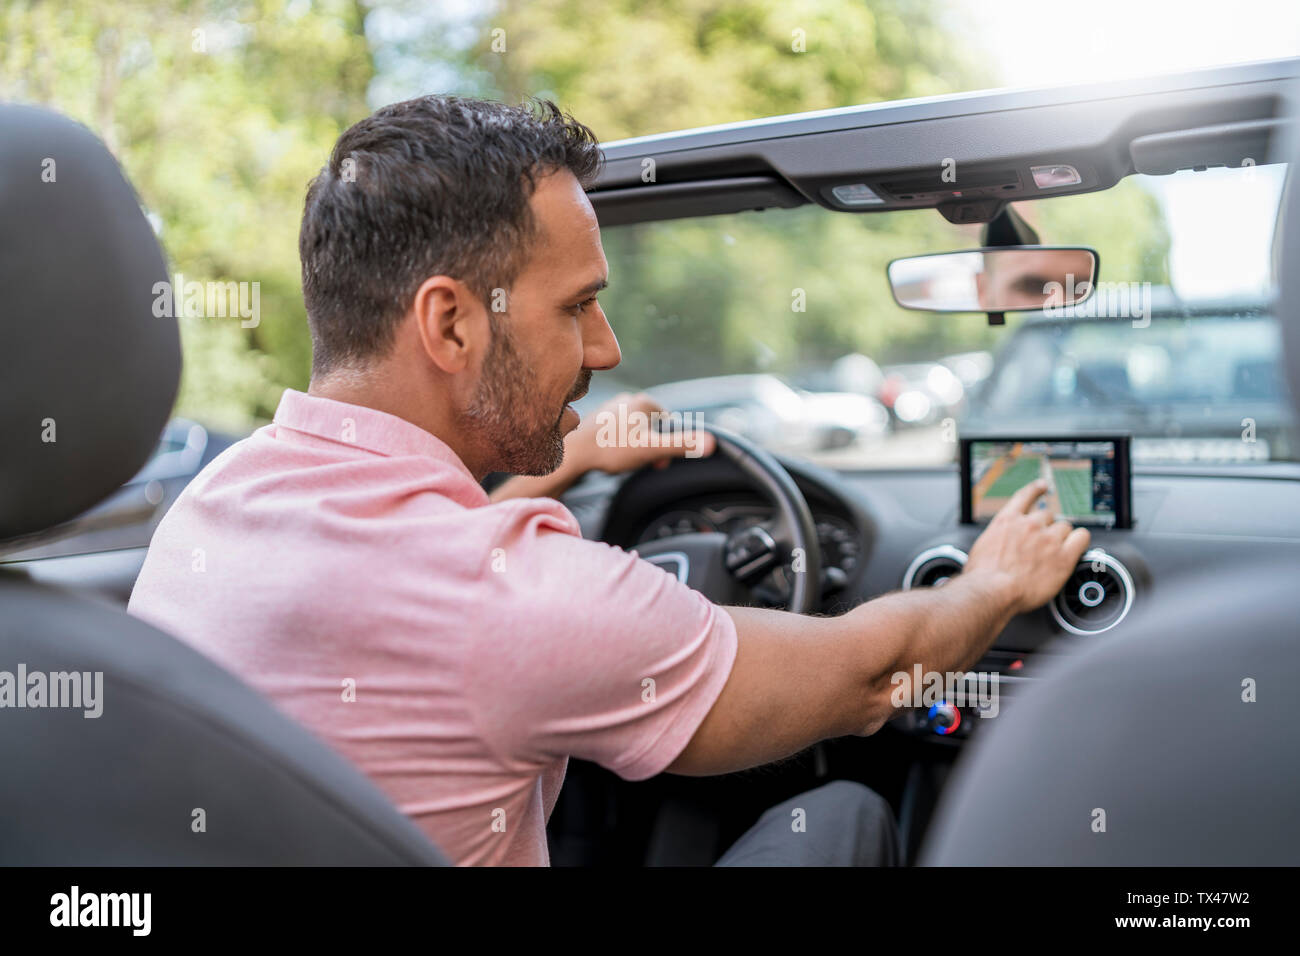 Man driving convertible using route guidance system Stock Photo